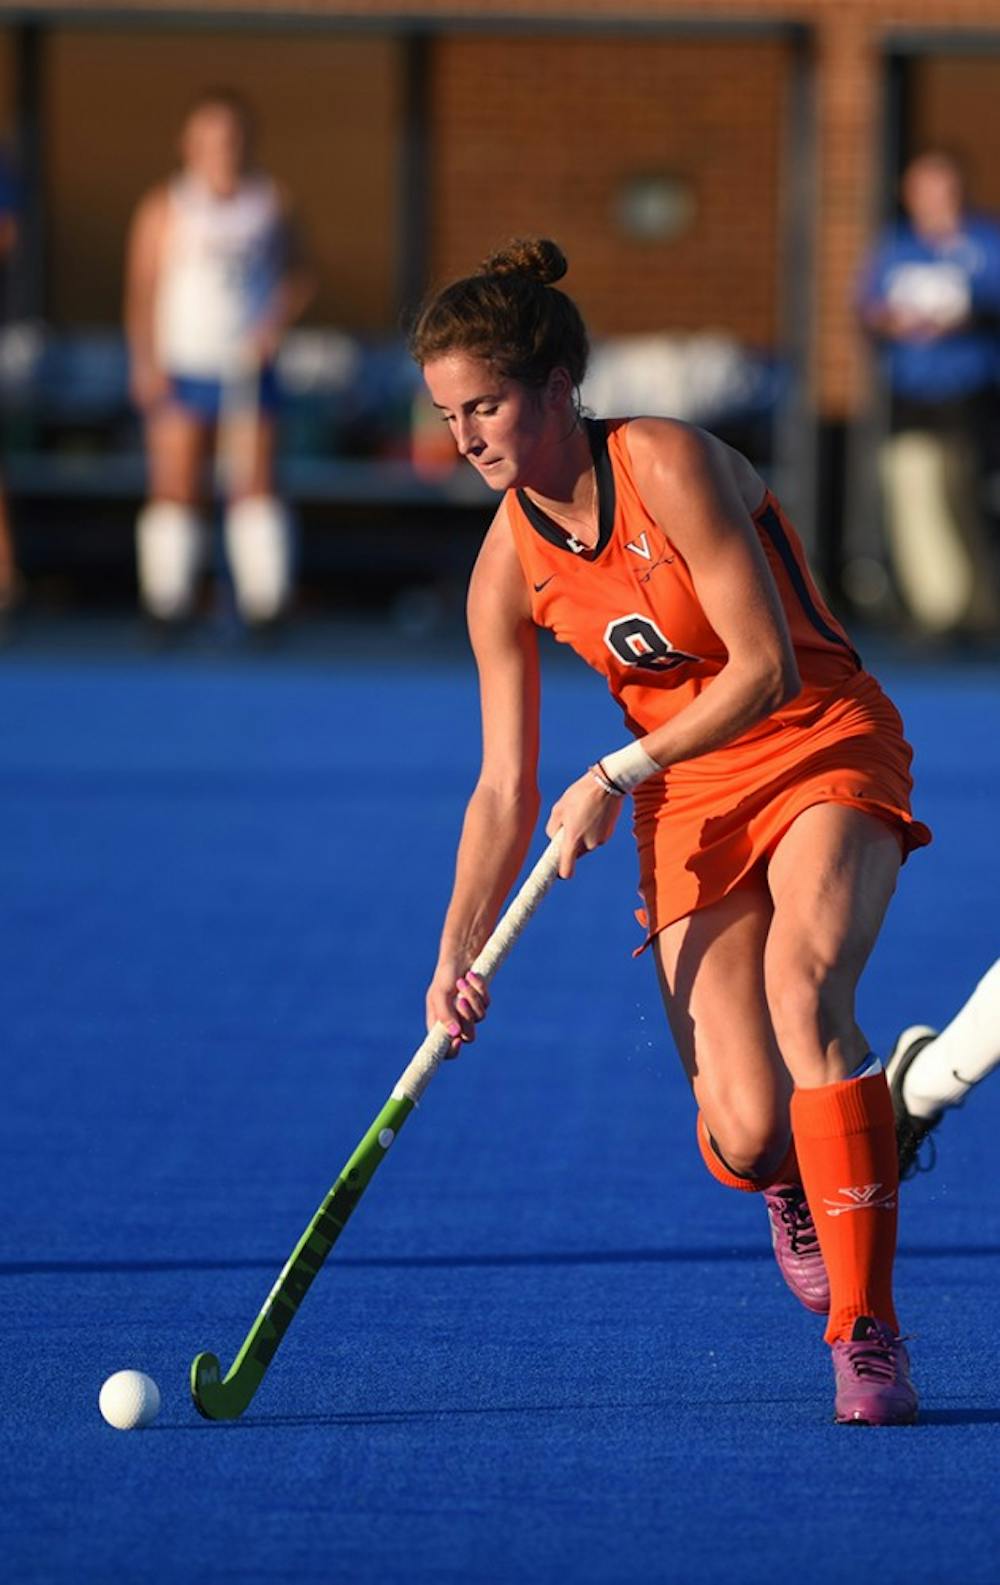 <p>Junior midfielder Tara Vittese's 66th minute goal tied the game at two, forcing overtime against No. 3 North Carolina.&nbsp;</p>